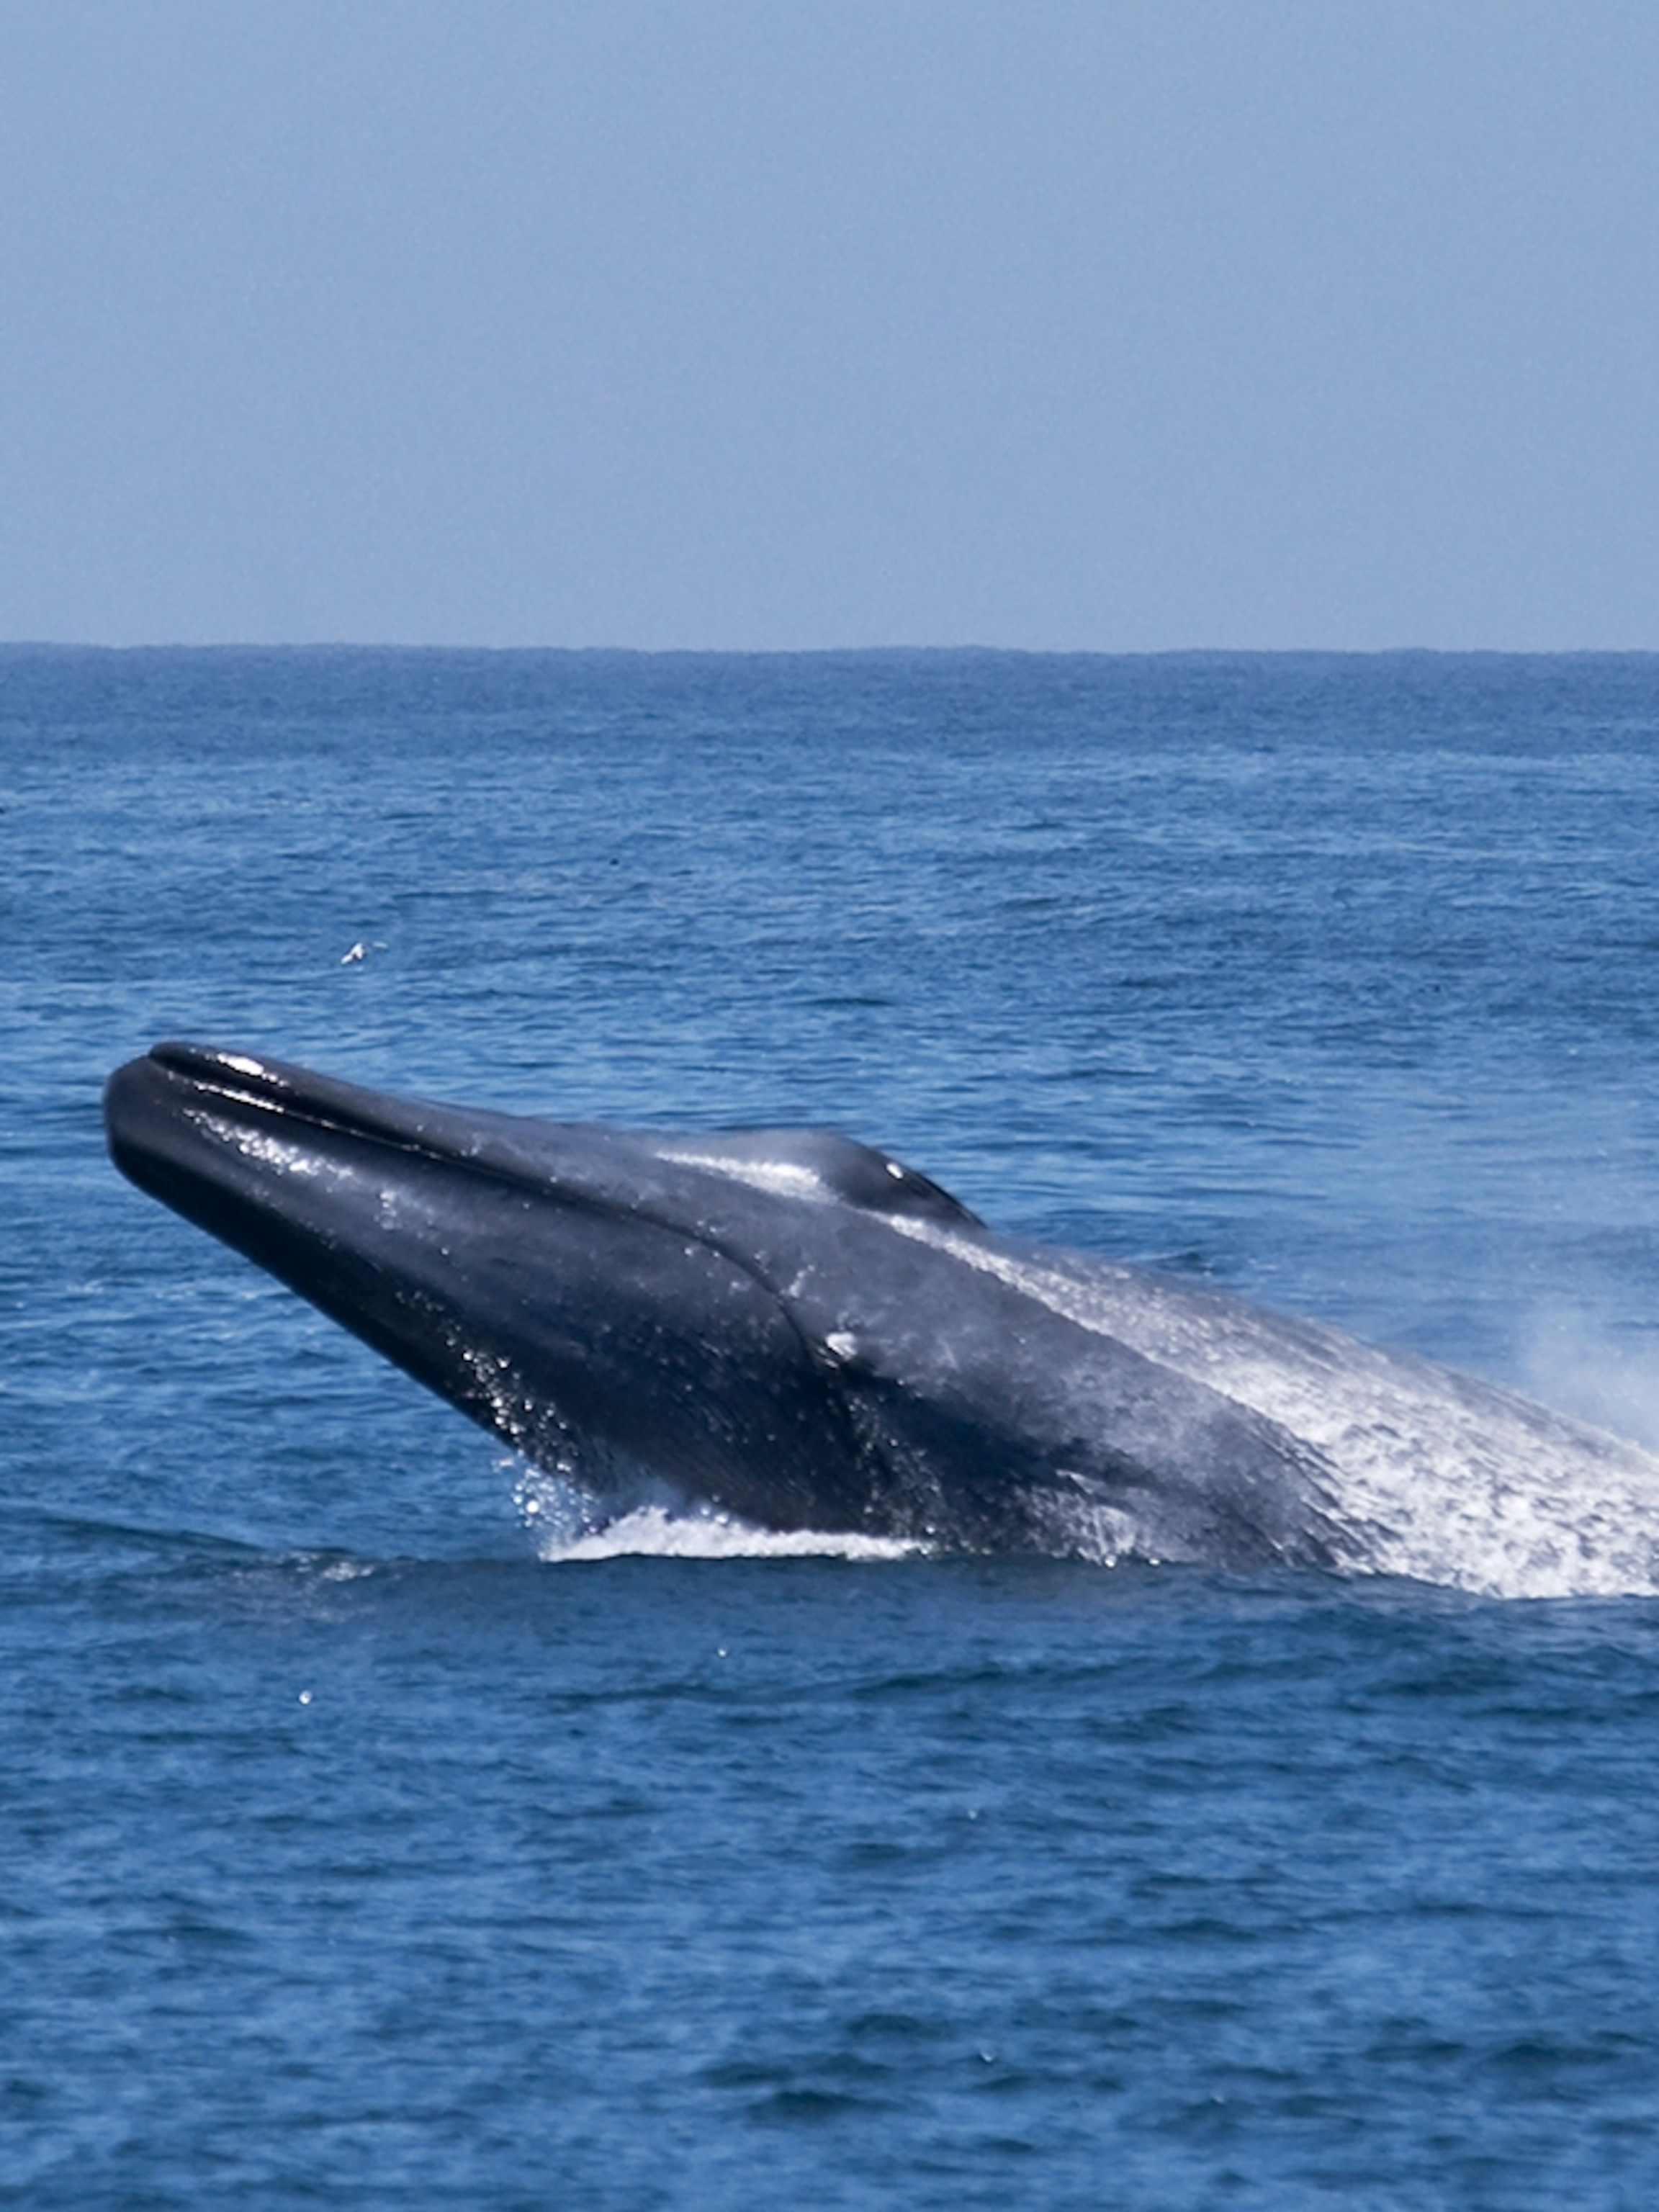 Blue whale, facts and photos